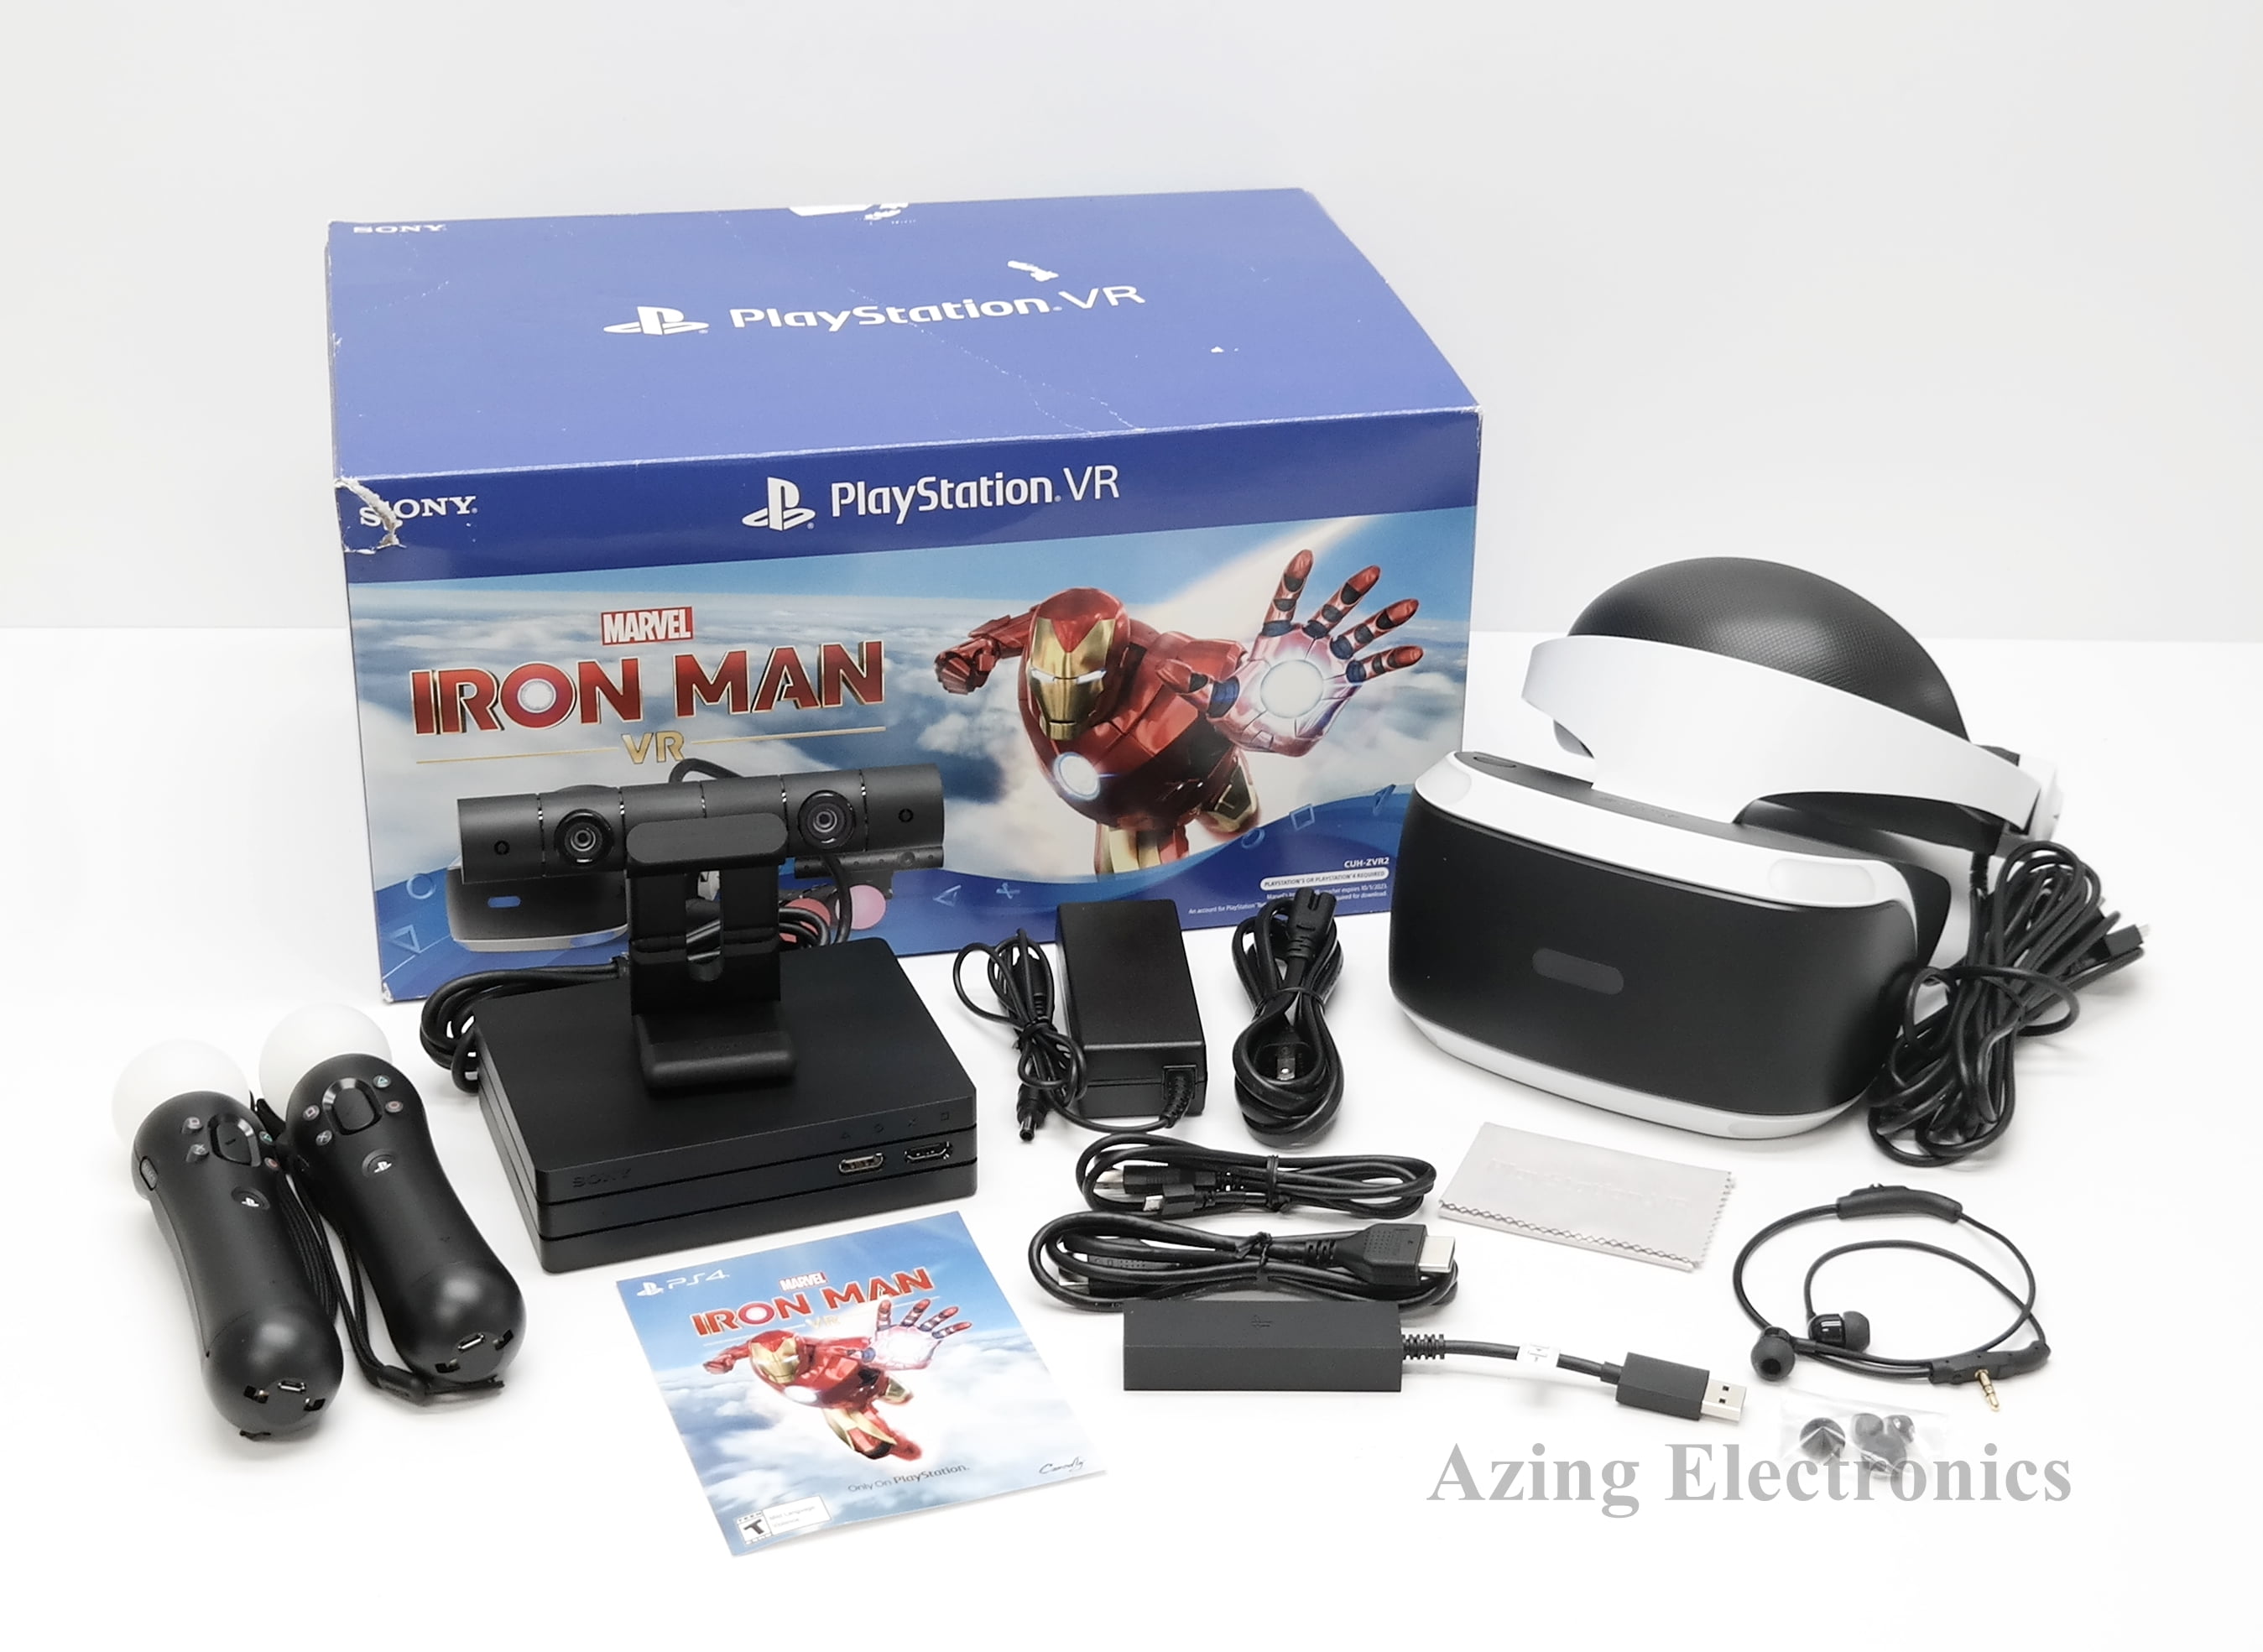 Hospital følsomhed At redigere Pre-Owned Sony PlayStation VR CUH-ZVR2 Virtual Reality Headset Iron Man VR  Bundle - Walmart.com